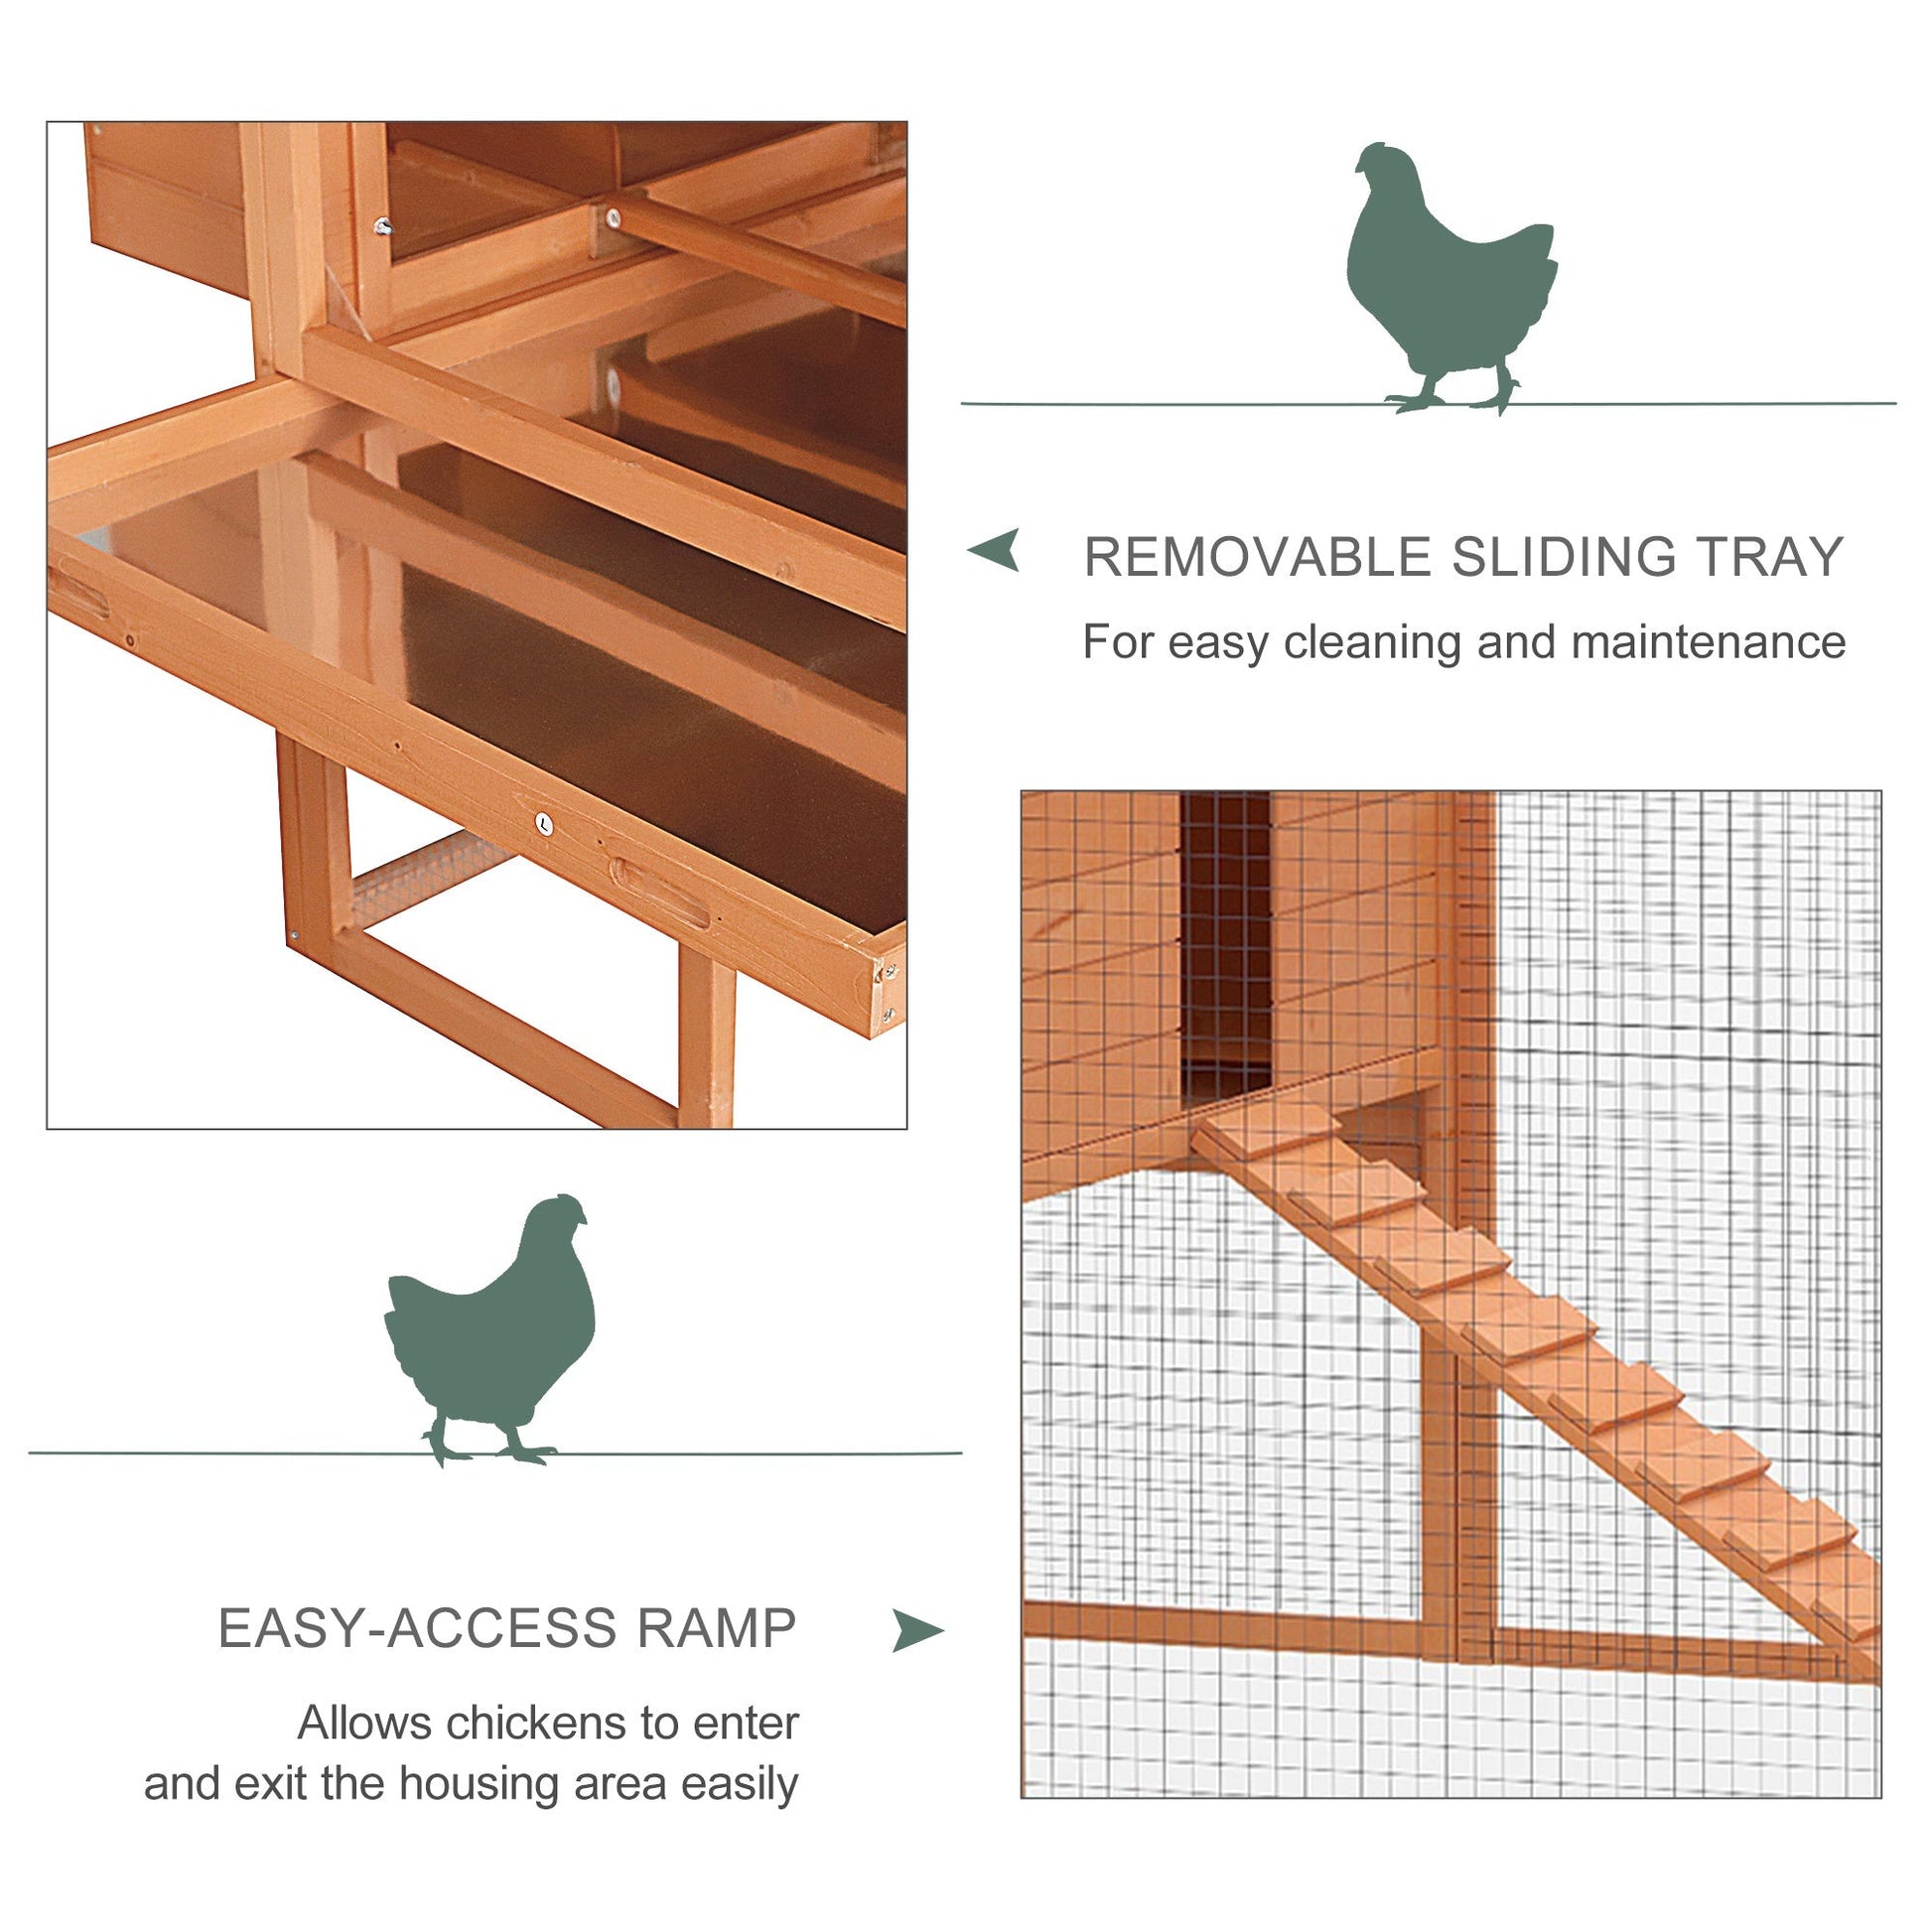 137" Chicken Coop Wooden Large Hen House Deluxe Rabbit Hutch Lockable Poultry Cage Backyard with Nesting Box and Run, Orange at Gallery Canada